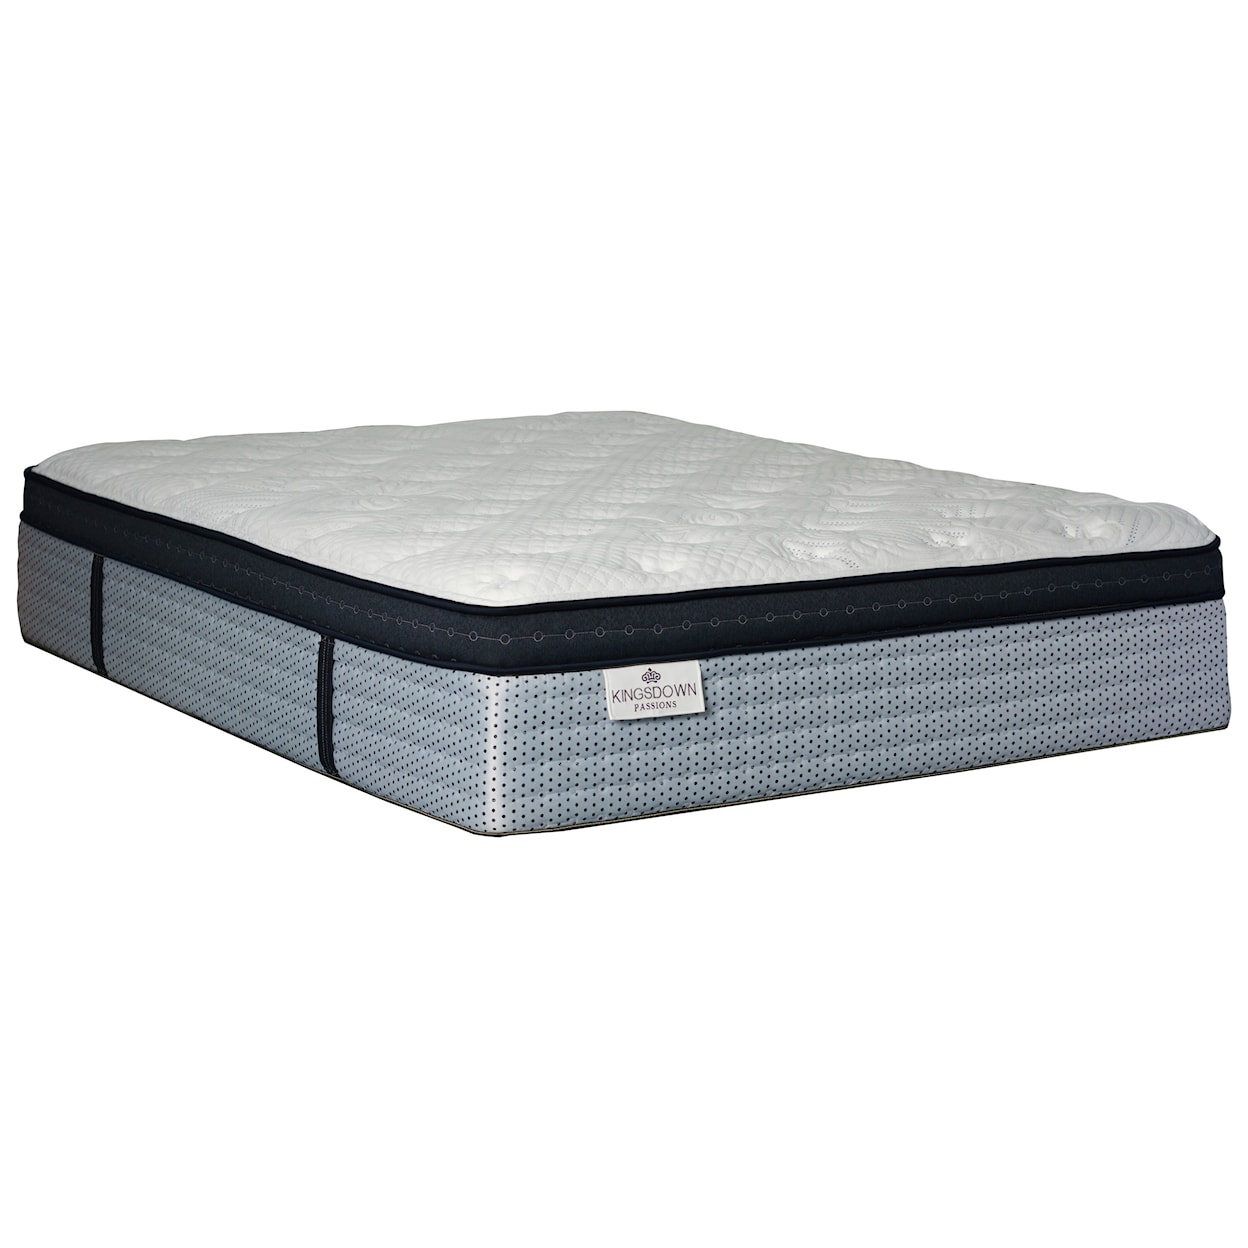 Kingsdown Brimsted ET Queen Pocketed Coil Mattress